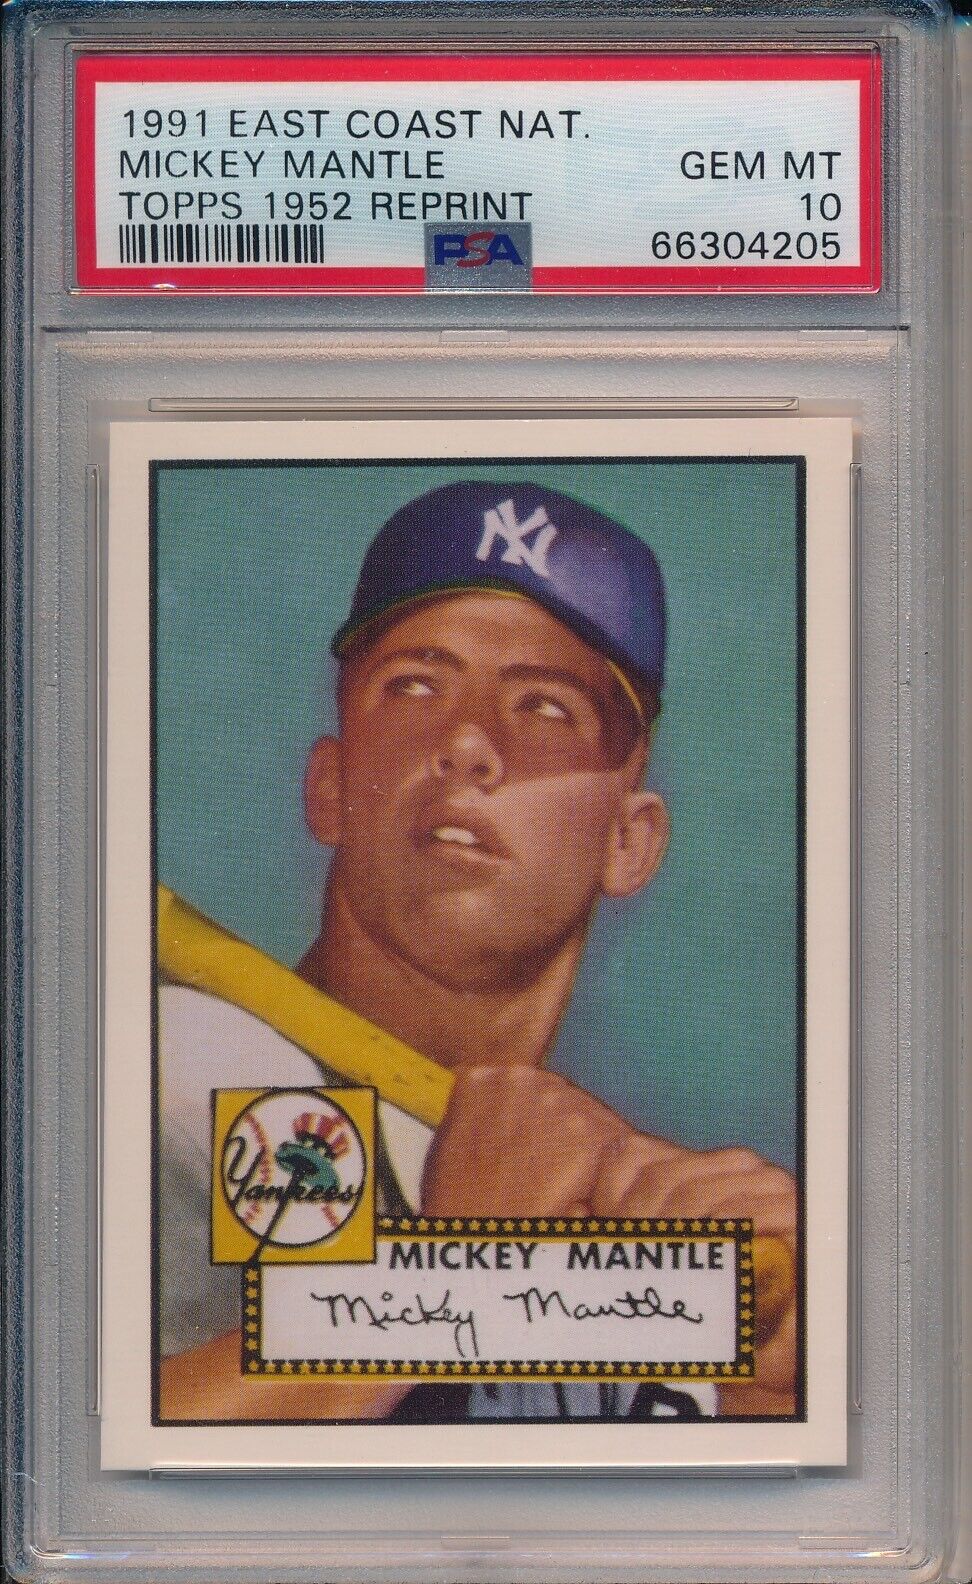 1991 TOPPS MICKEY MANTLE EAST COAST NATIONAL 1952 TOPPS PSA 10 GEM MINT